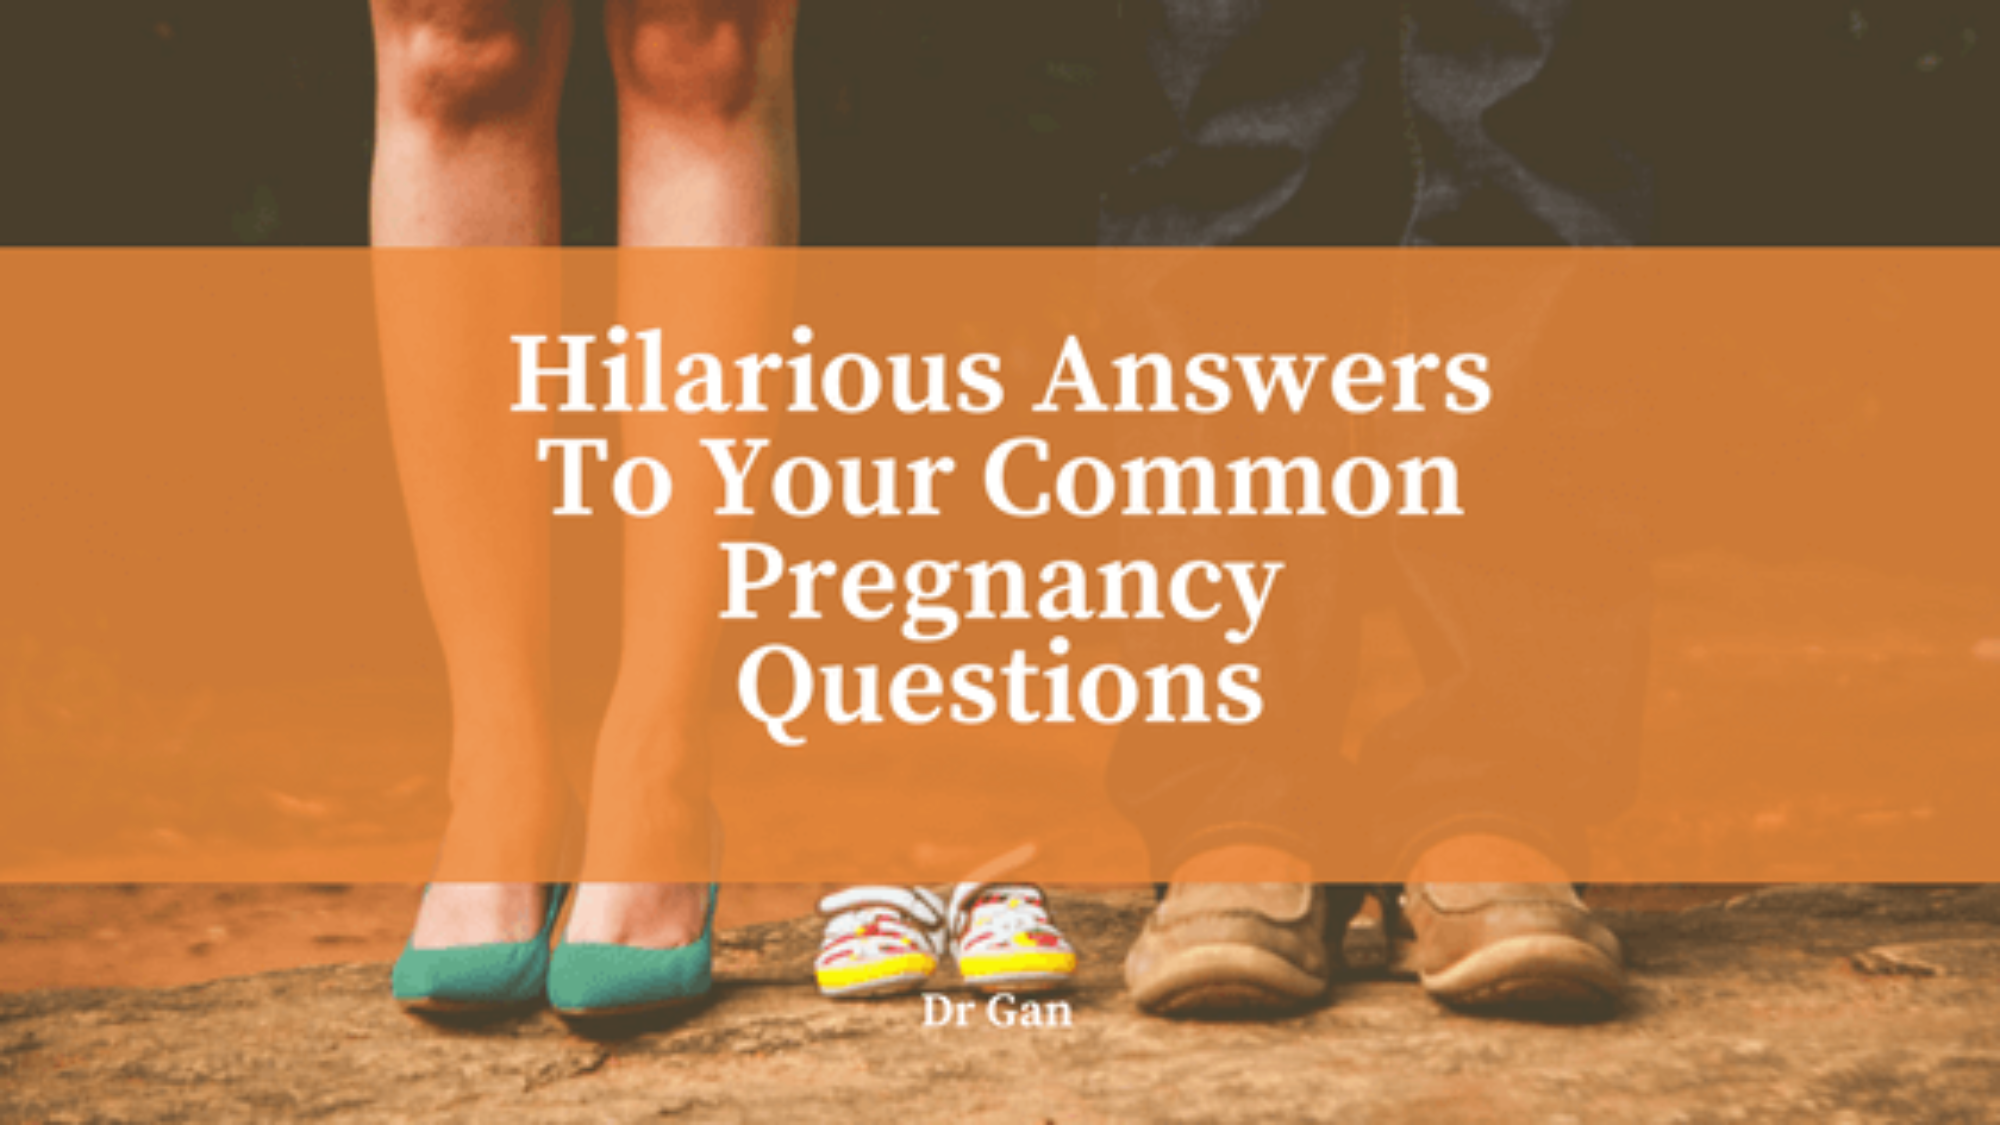 Hilarious-Answers-To-Your-Common-Pregnancy-Questions